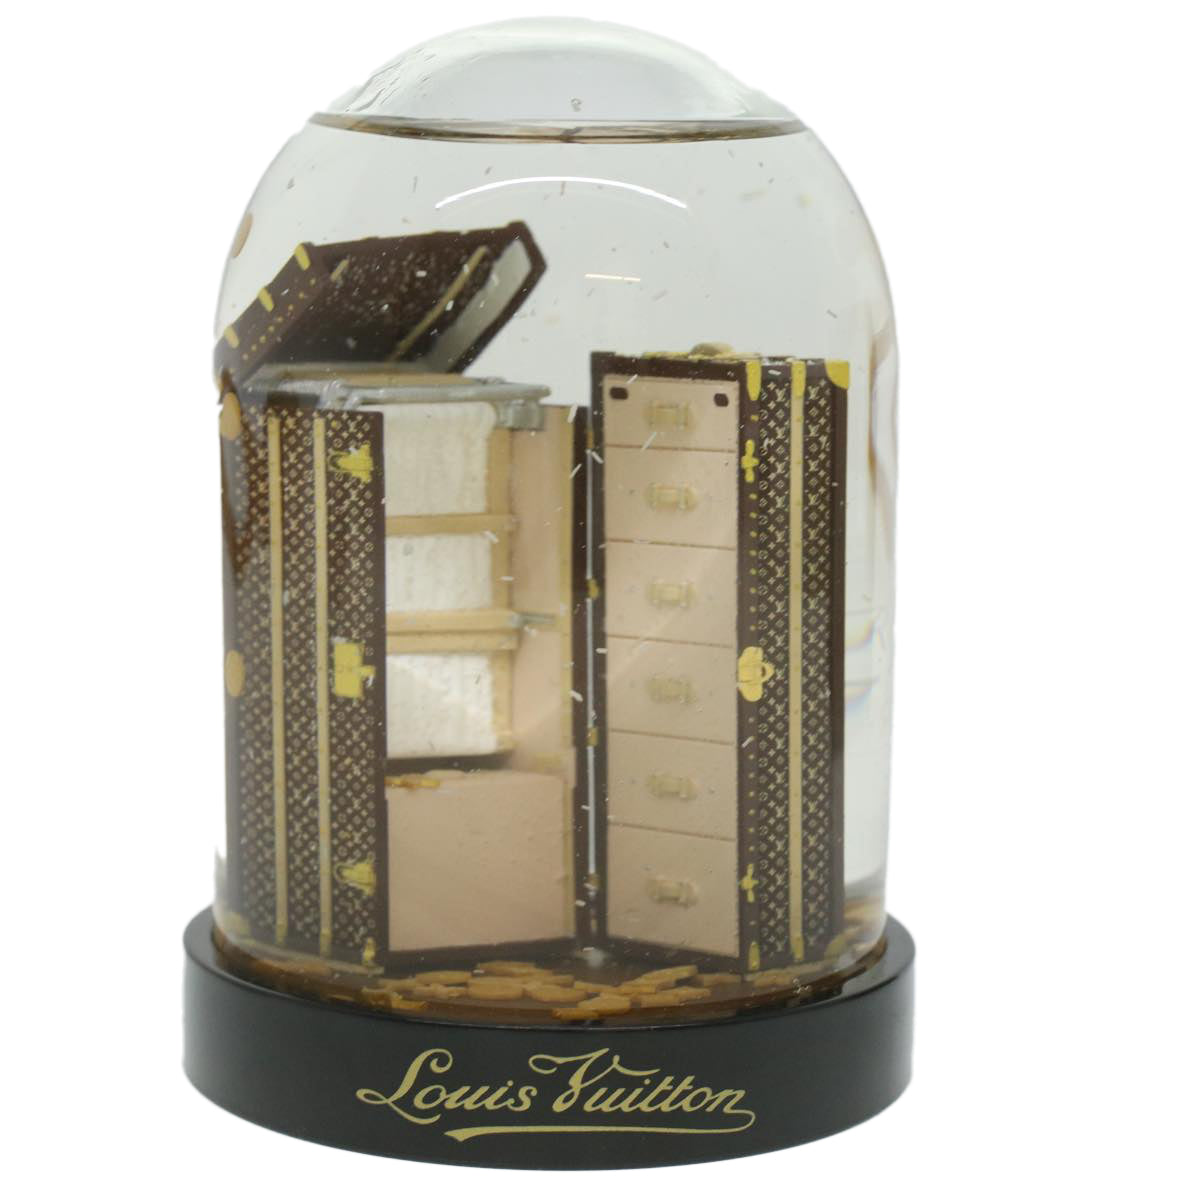 LOUIS VUITTON Wardrobe Trunk Snow Globe 2009 limited year Clear LV Auth 37516 - 0